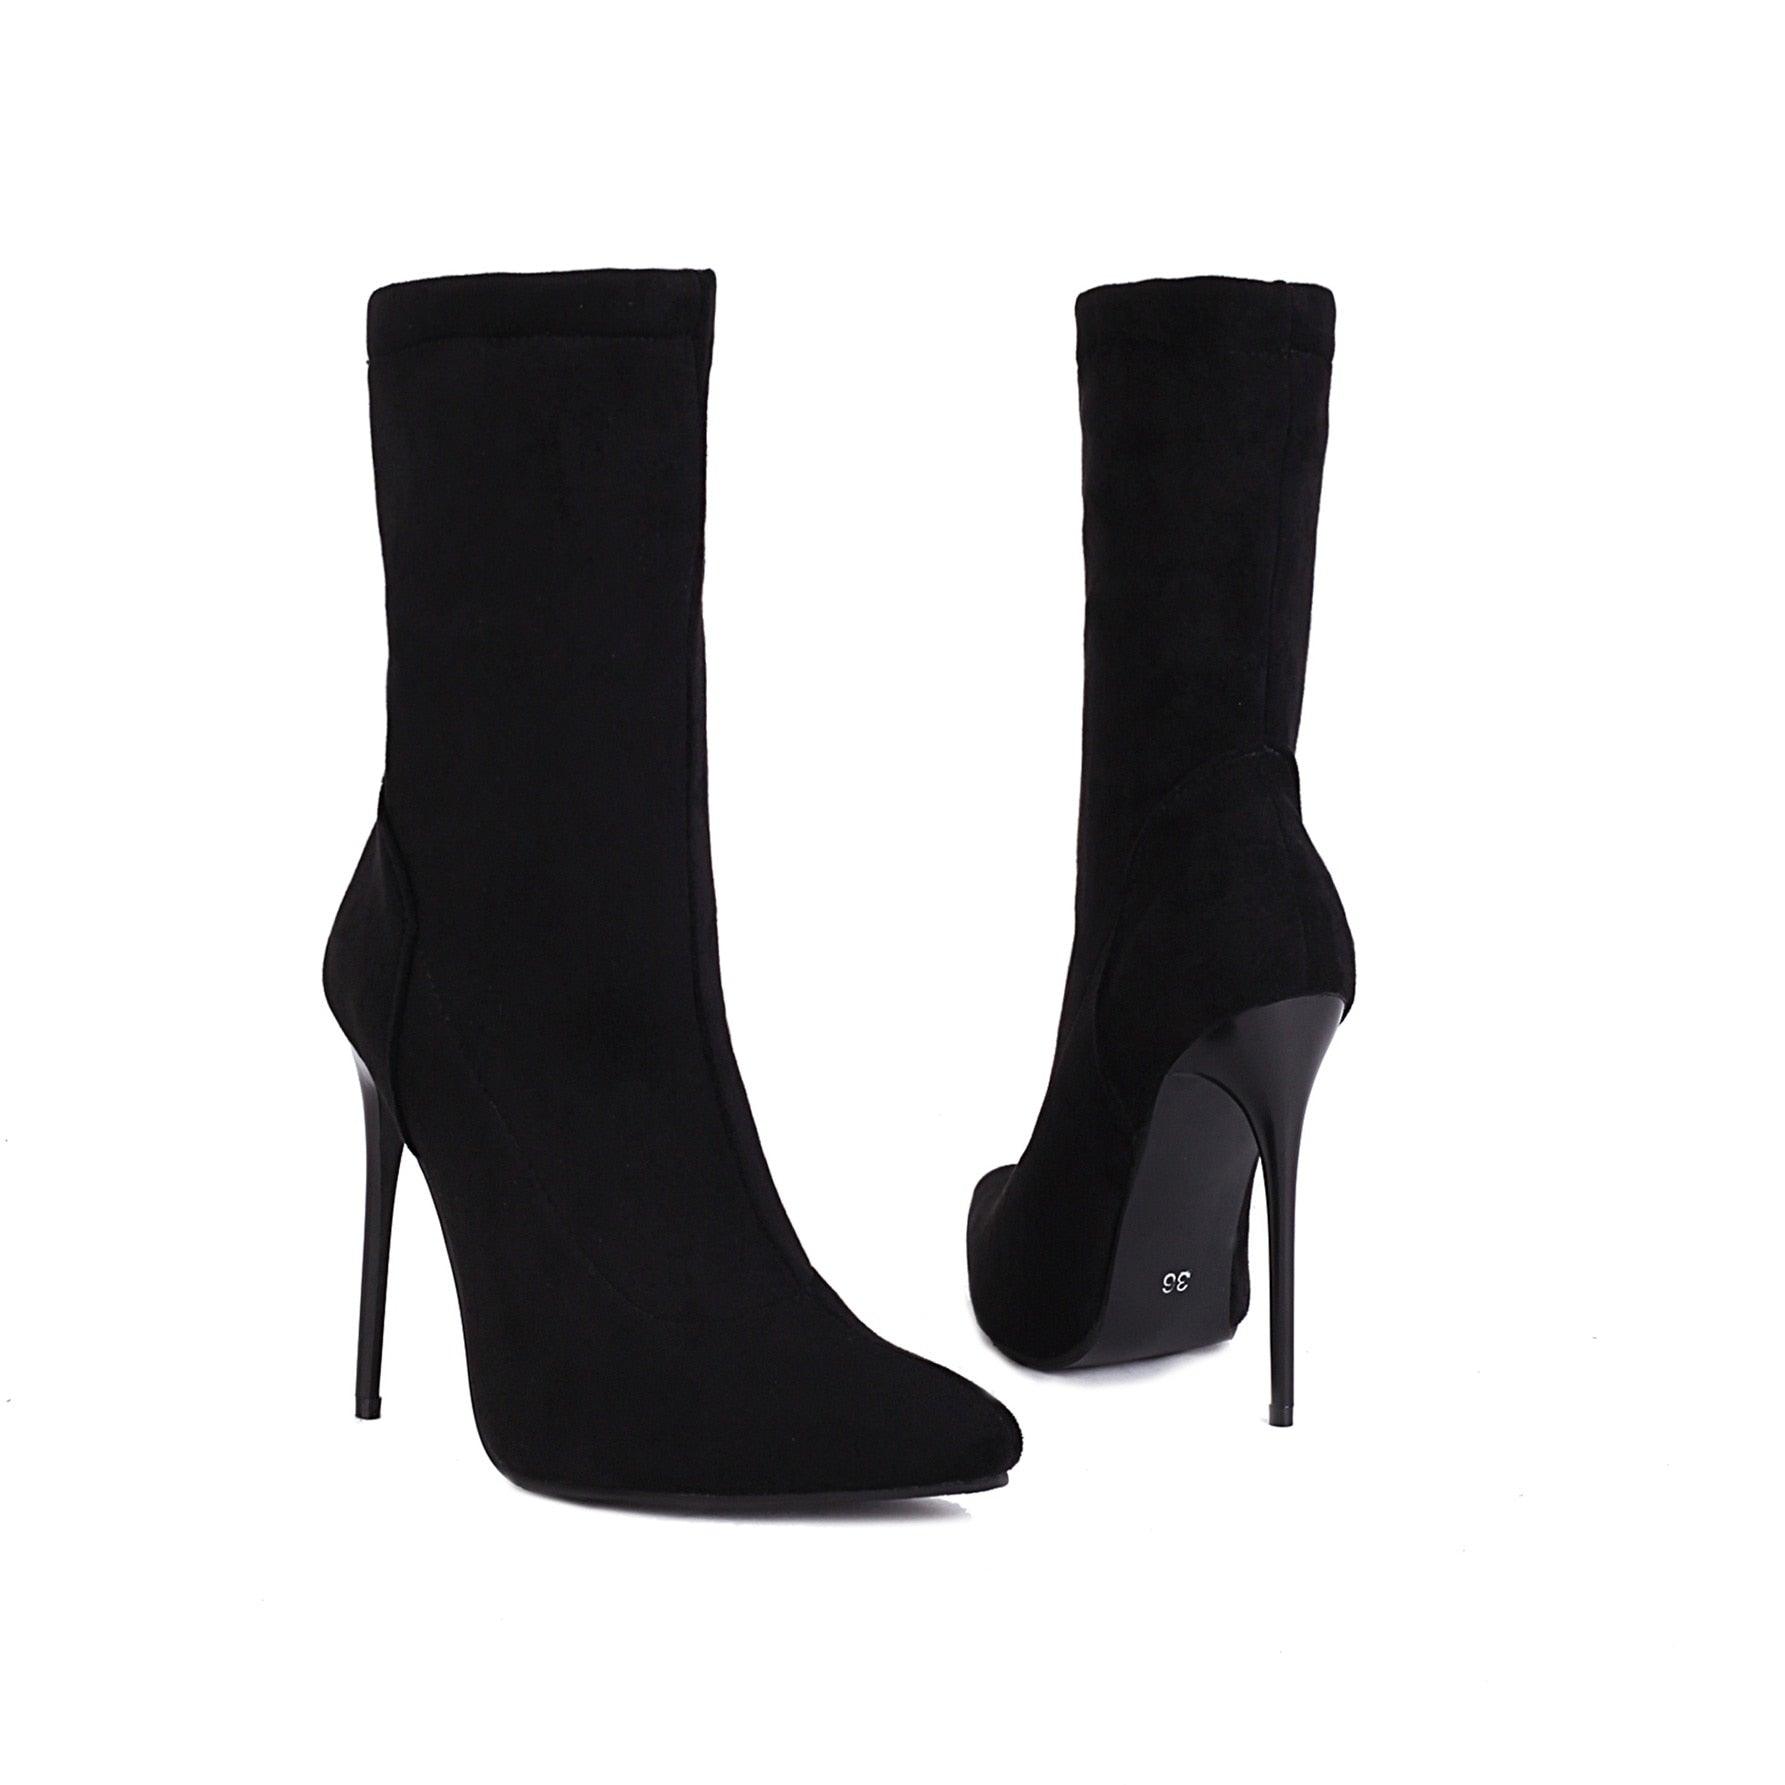 12 cm High Heel Ankle Boots - Your Shiny Clothes